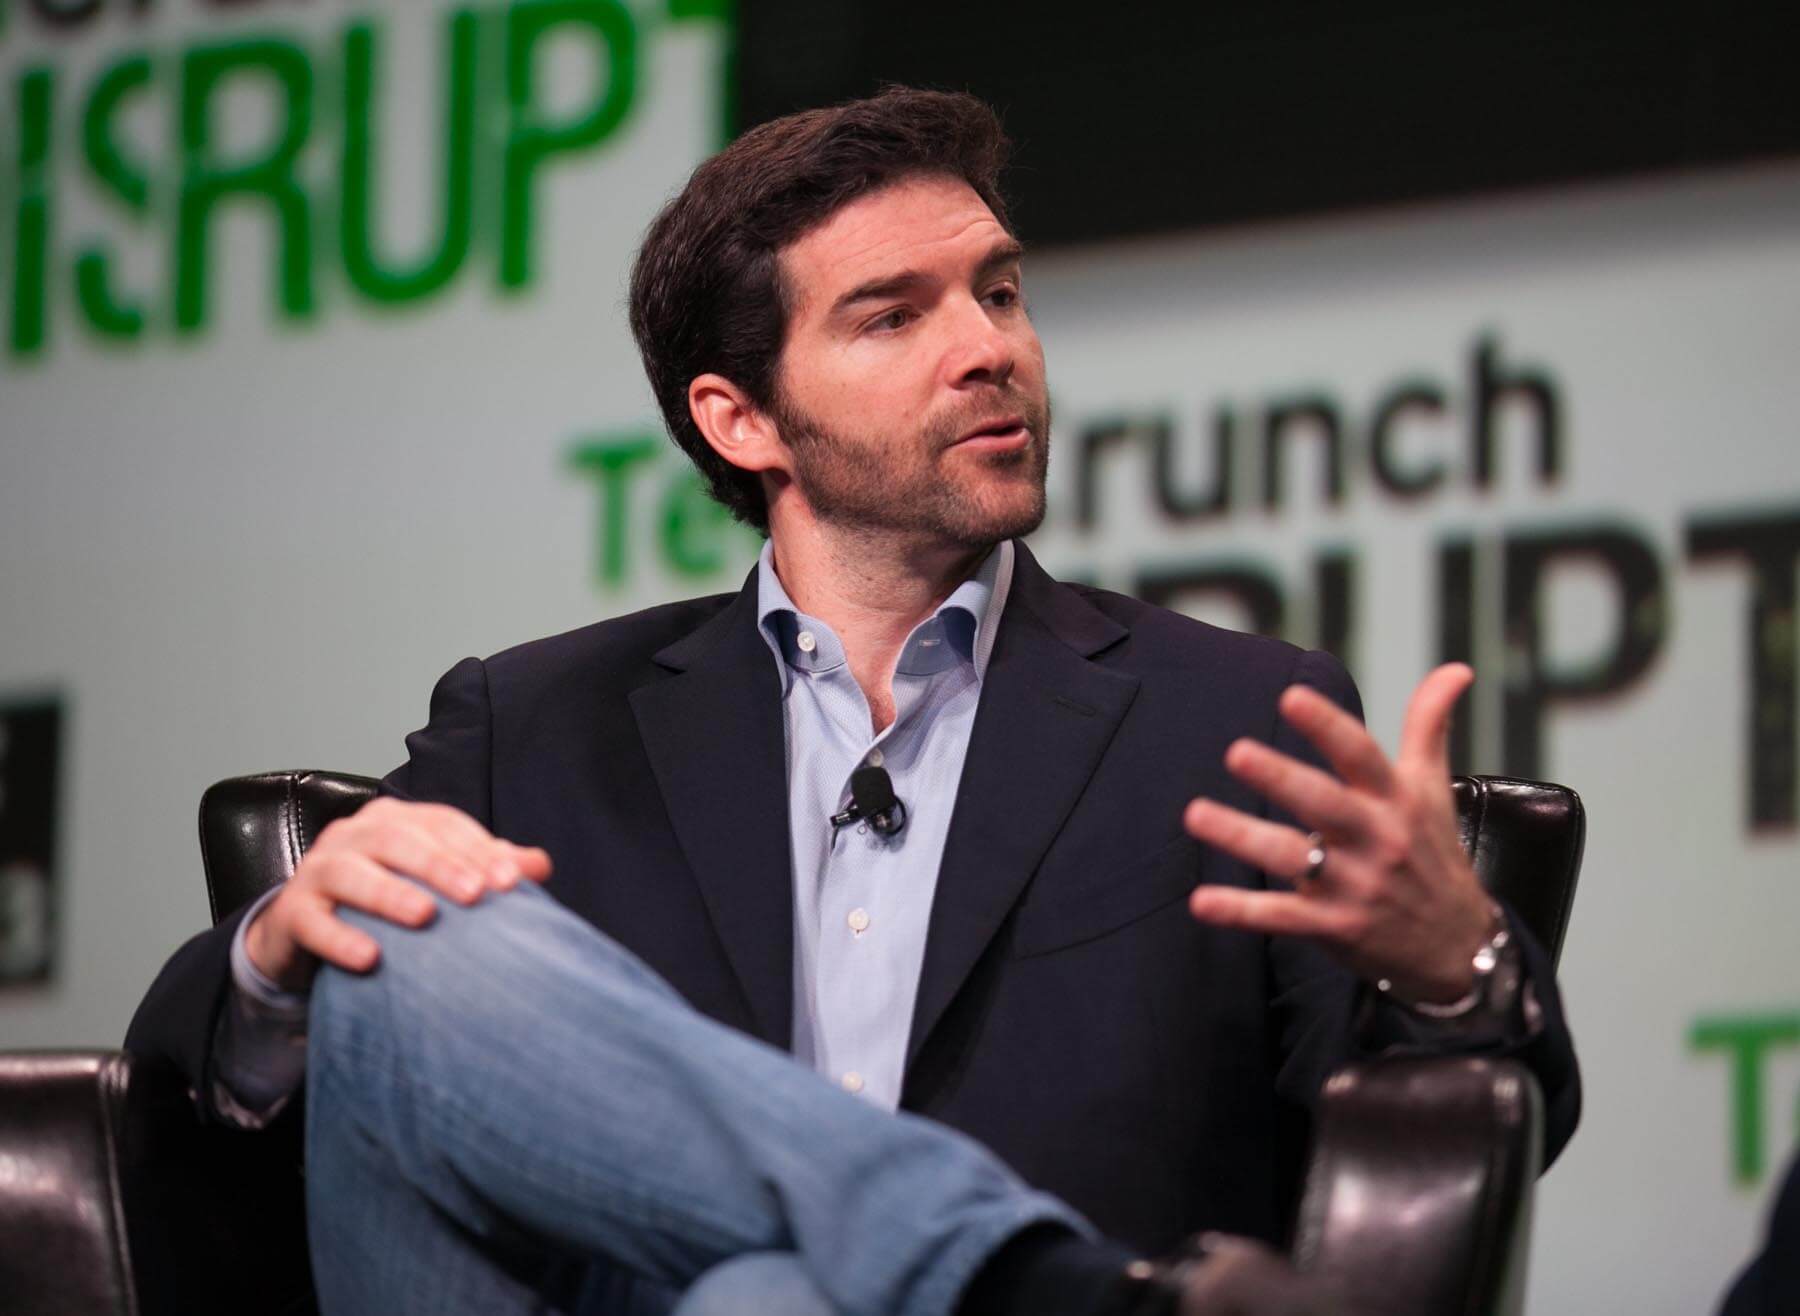 Lessons Learned: LinkedIn’s CEO Jeff Weiner on how to build better companies with compassion